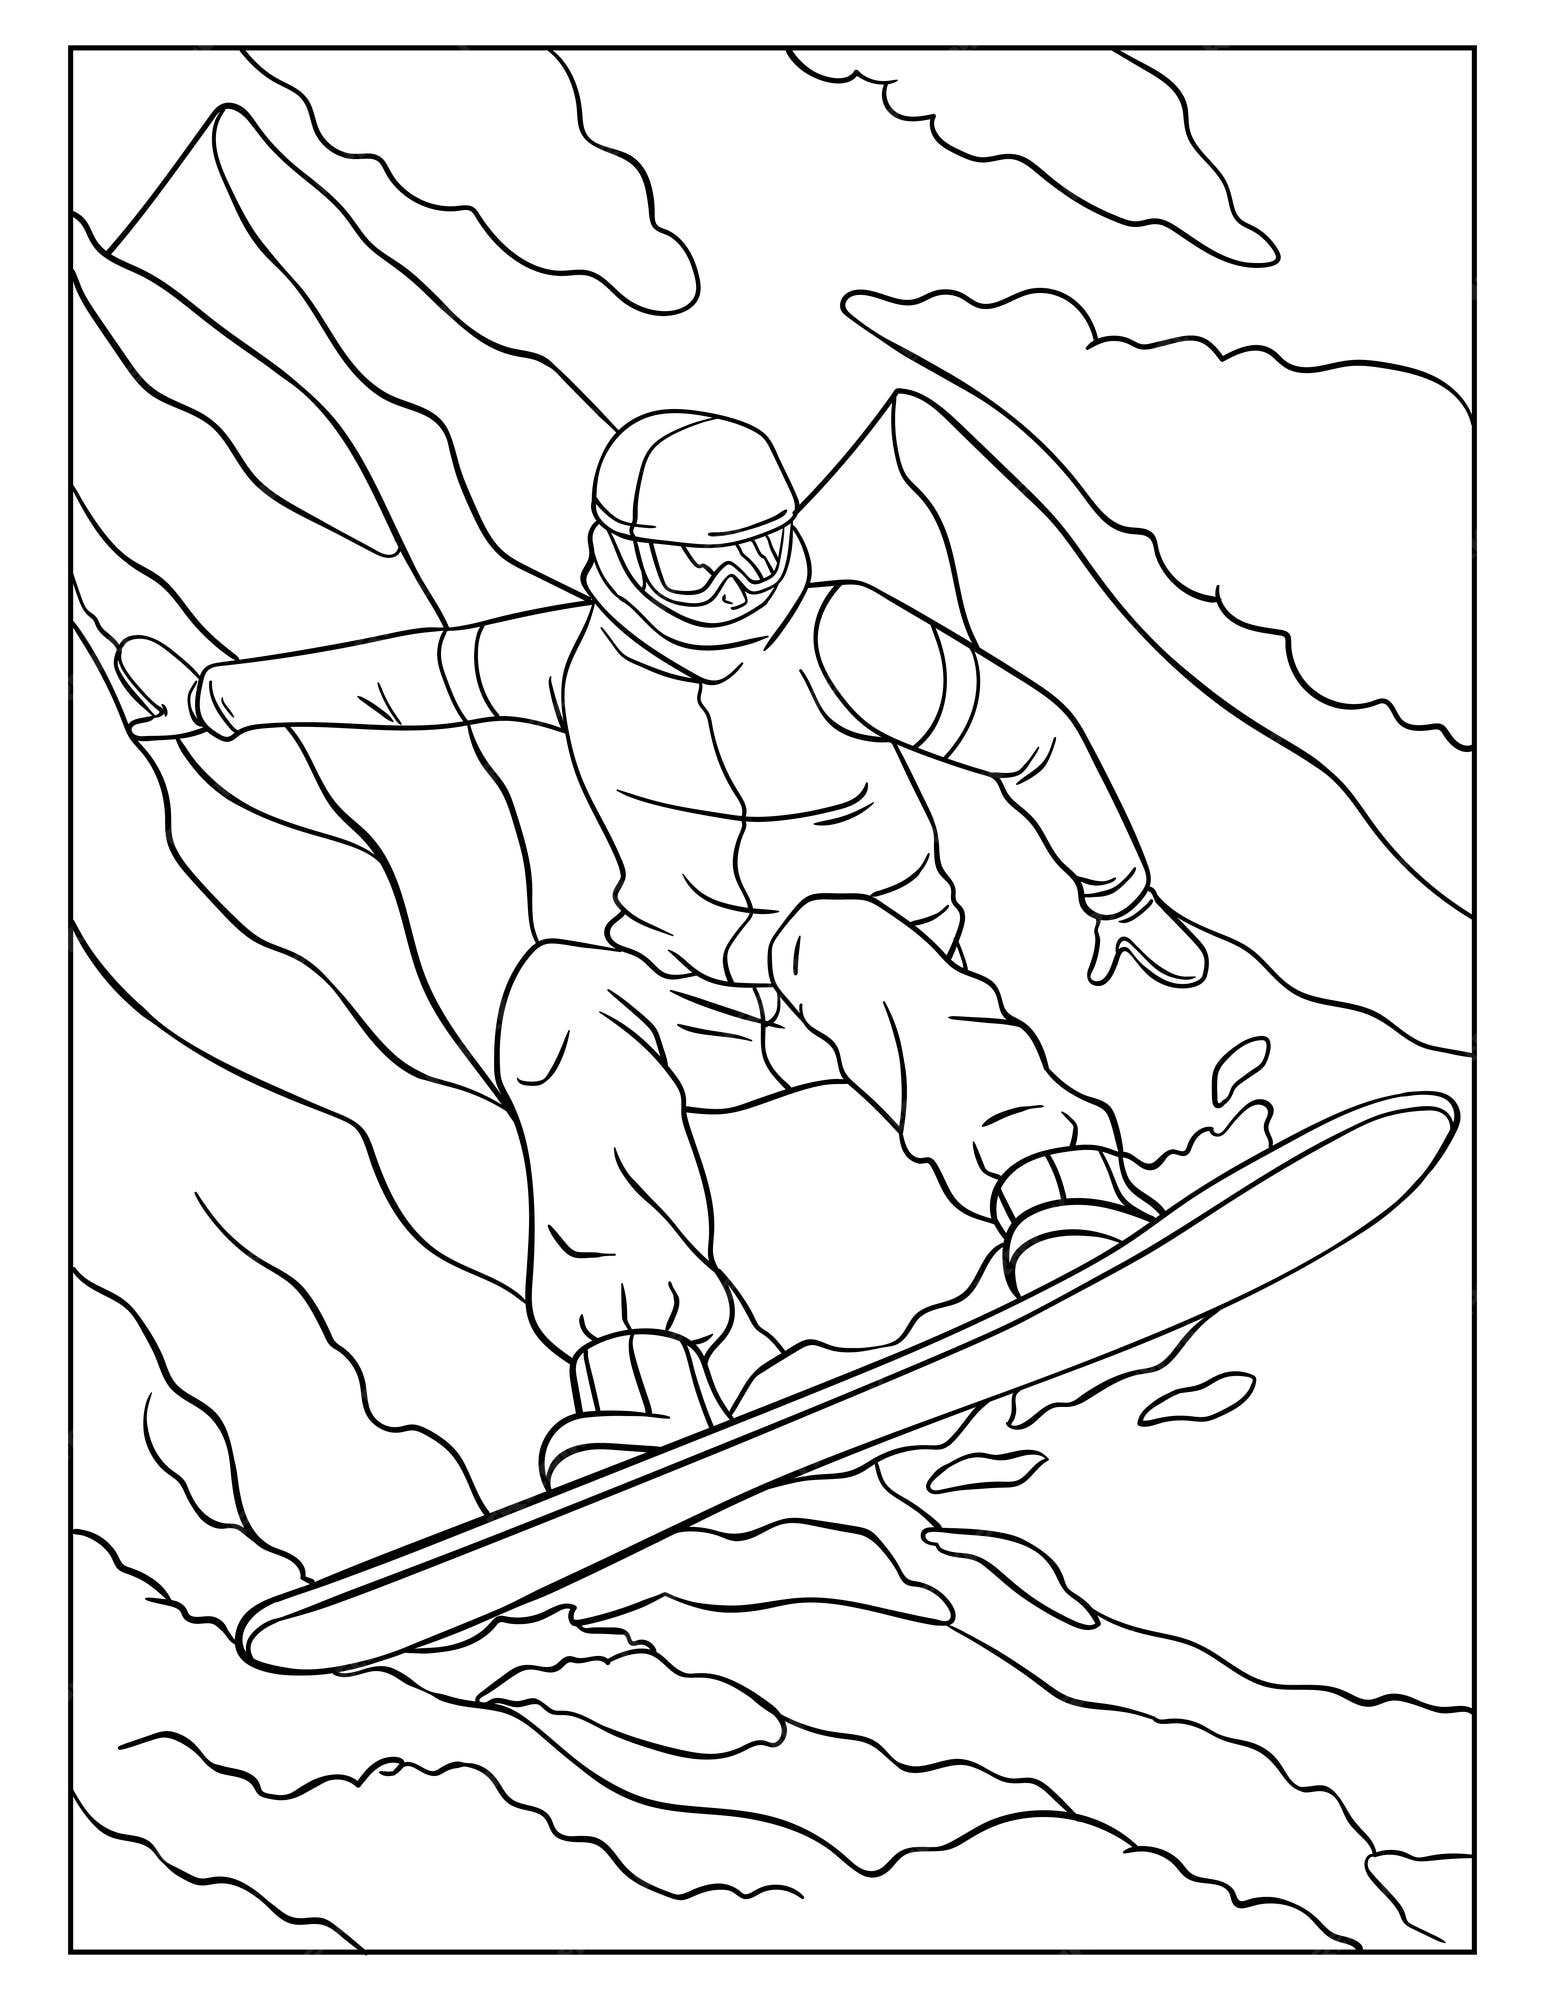 Premium vector snowboarding coloring page for kids